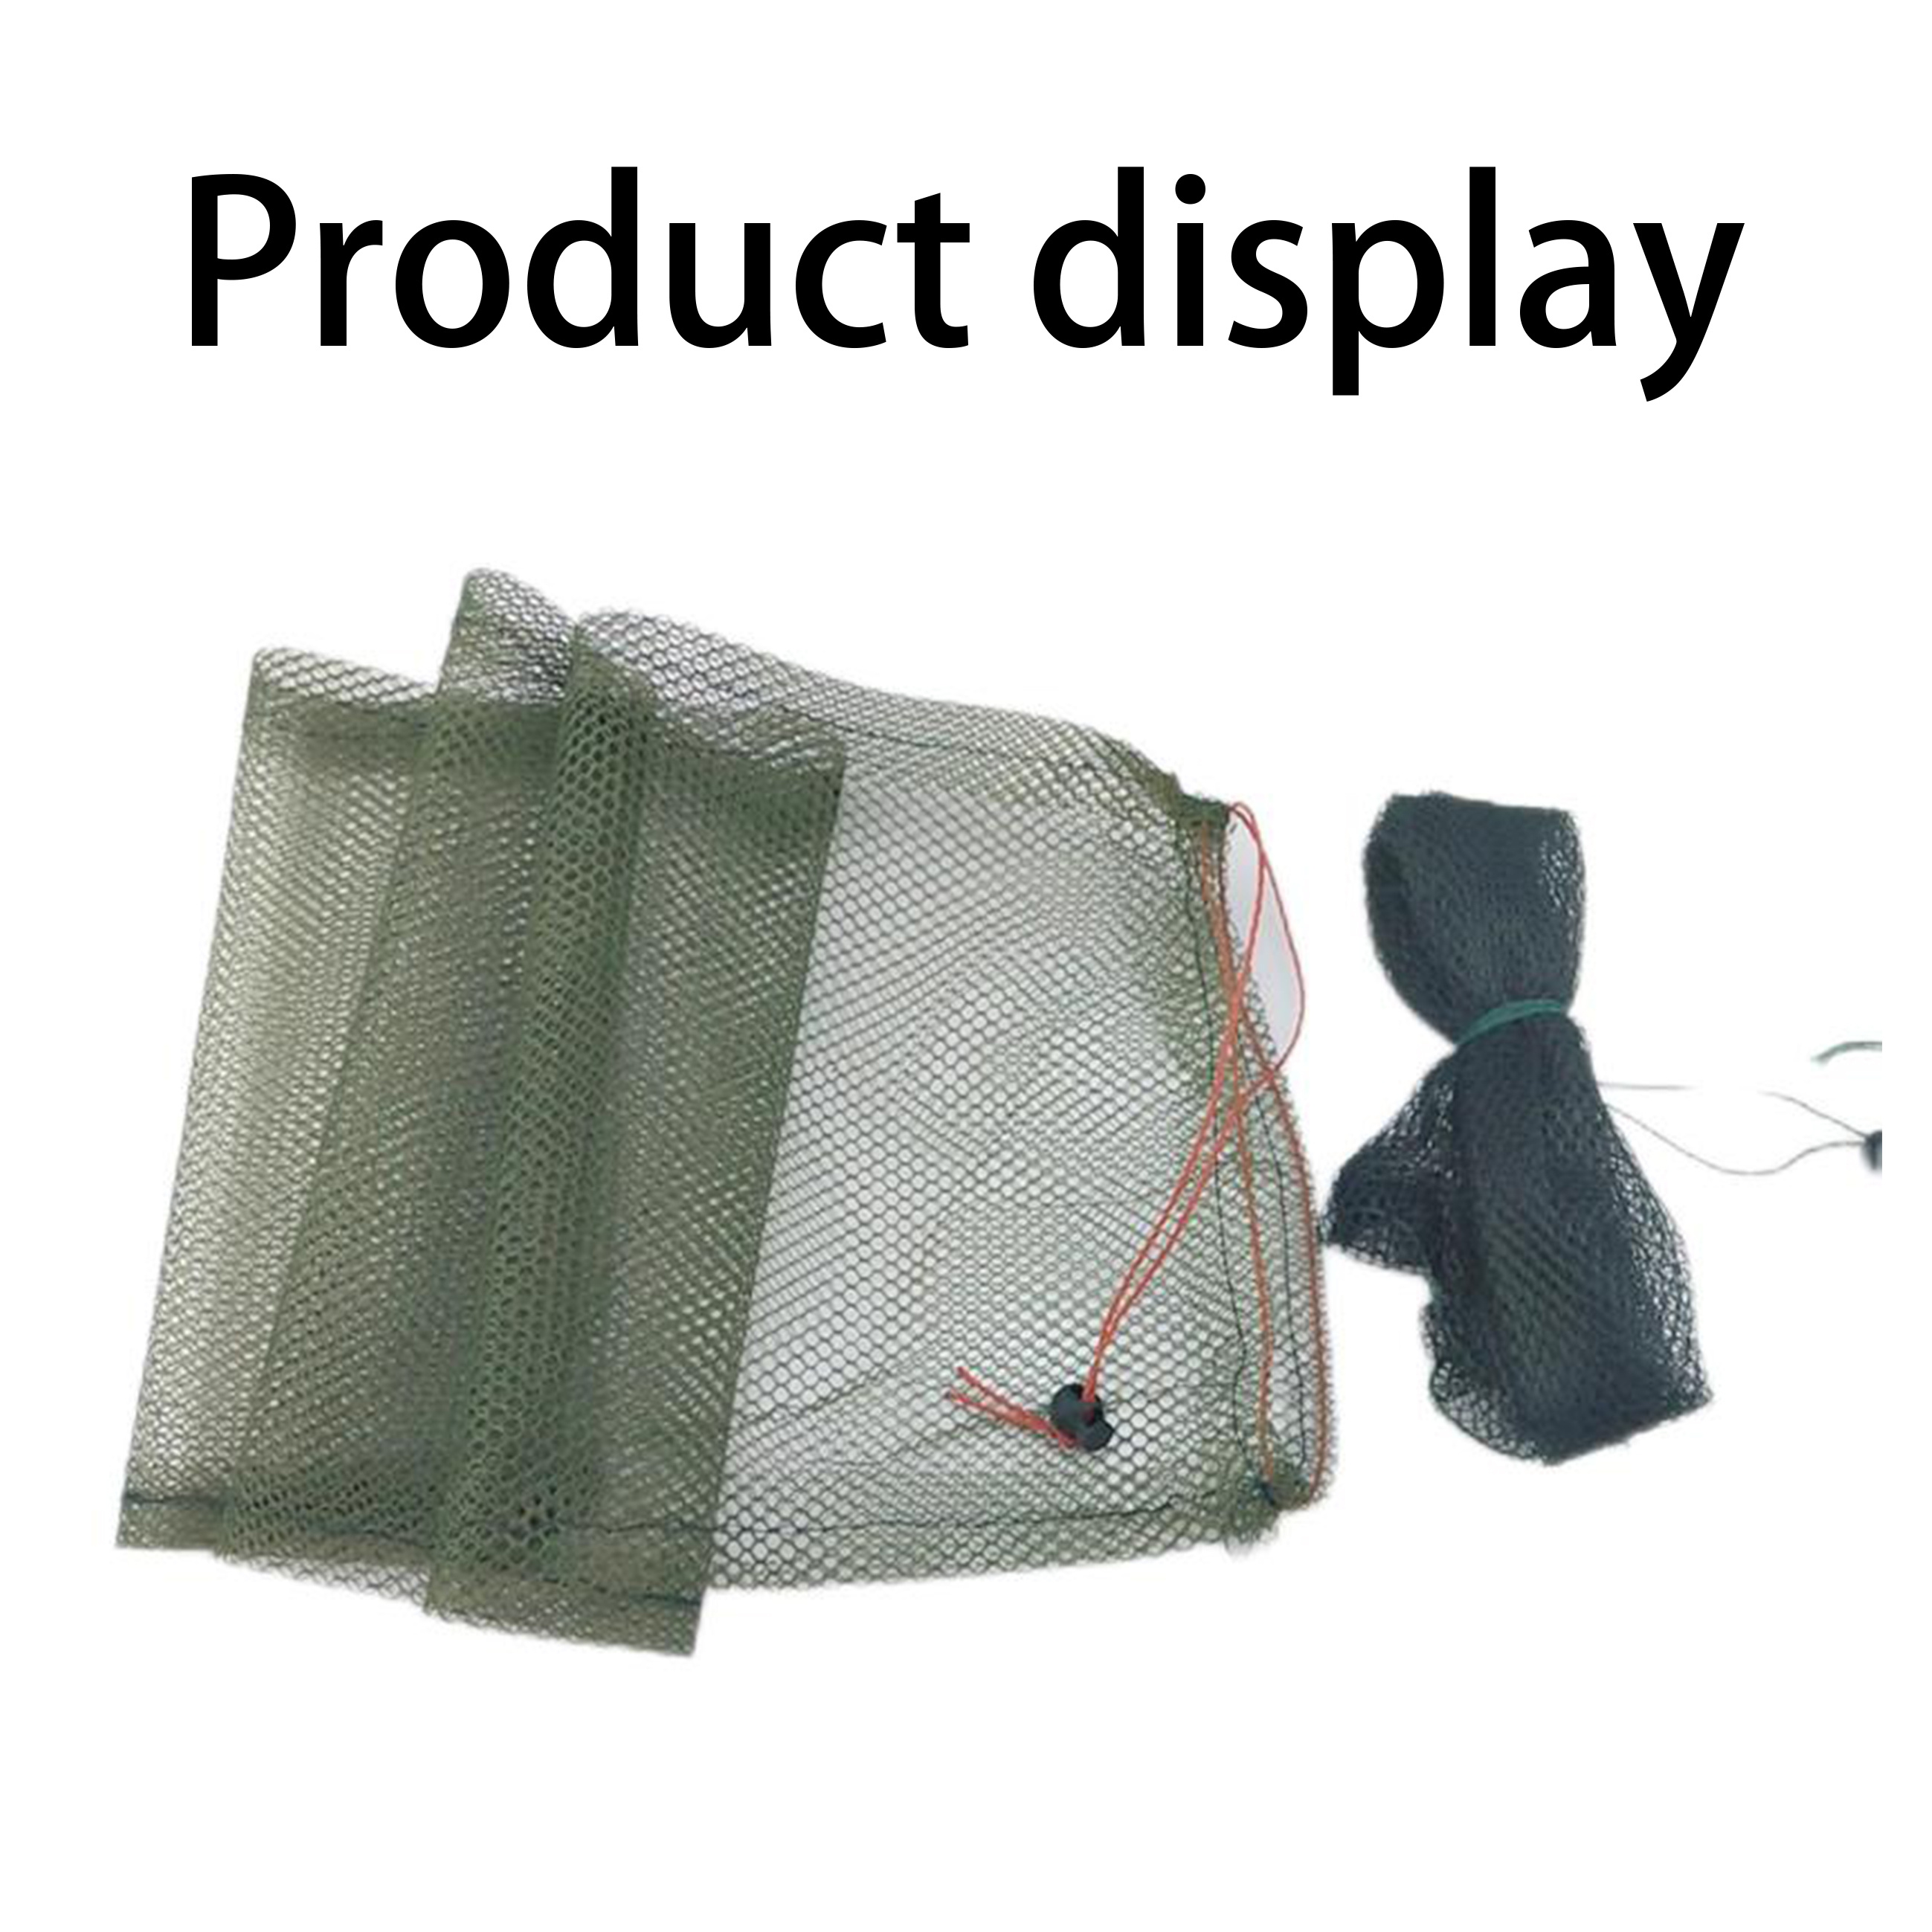 1pc Small Net Pocket Bag - Perfect for Fishing Storage & Accessories!